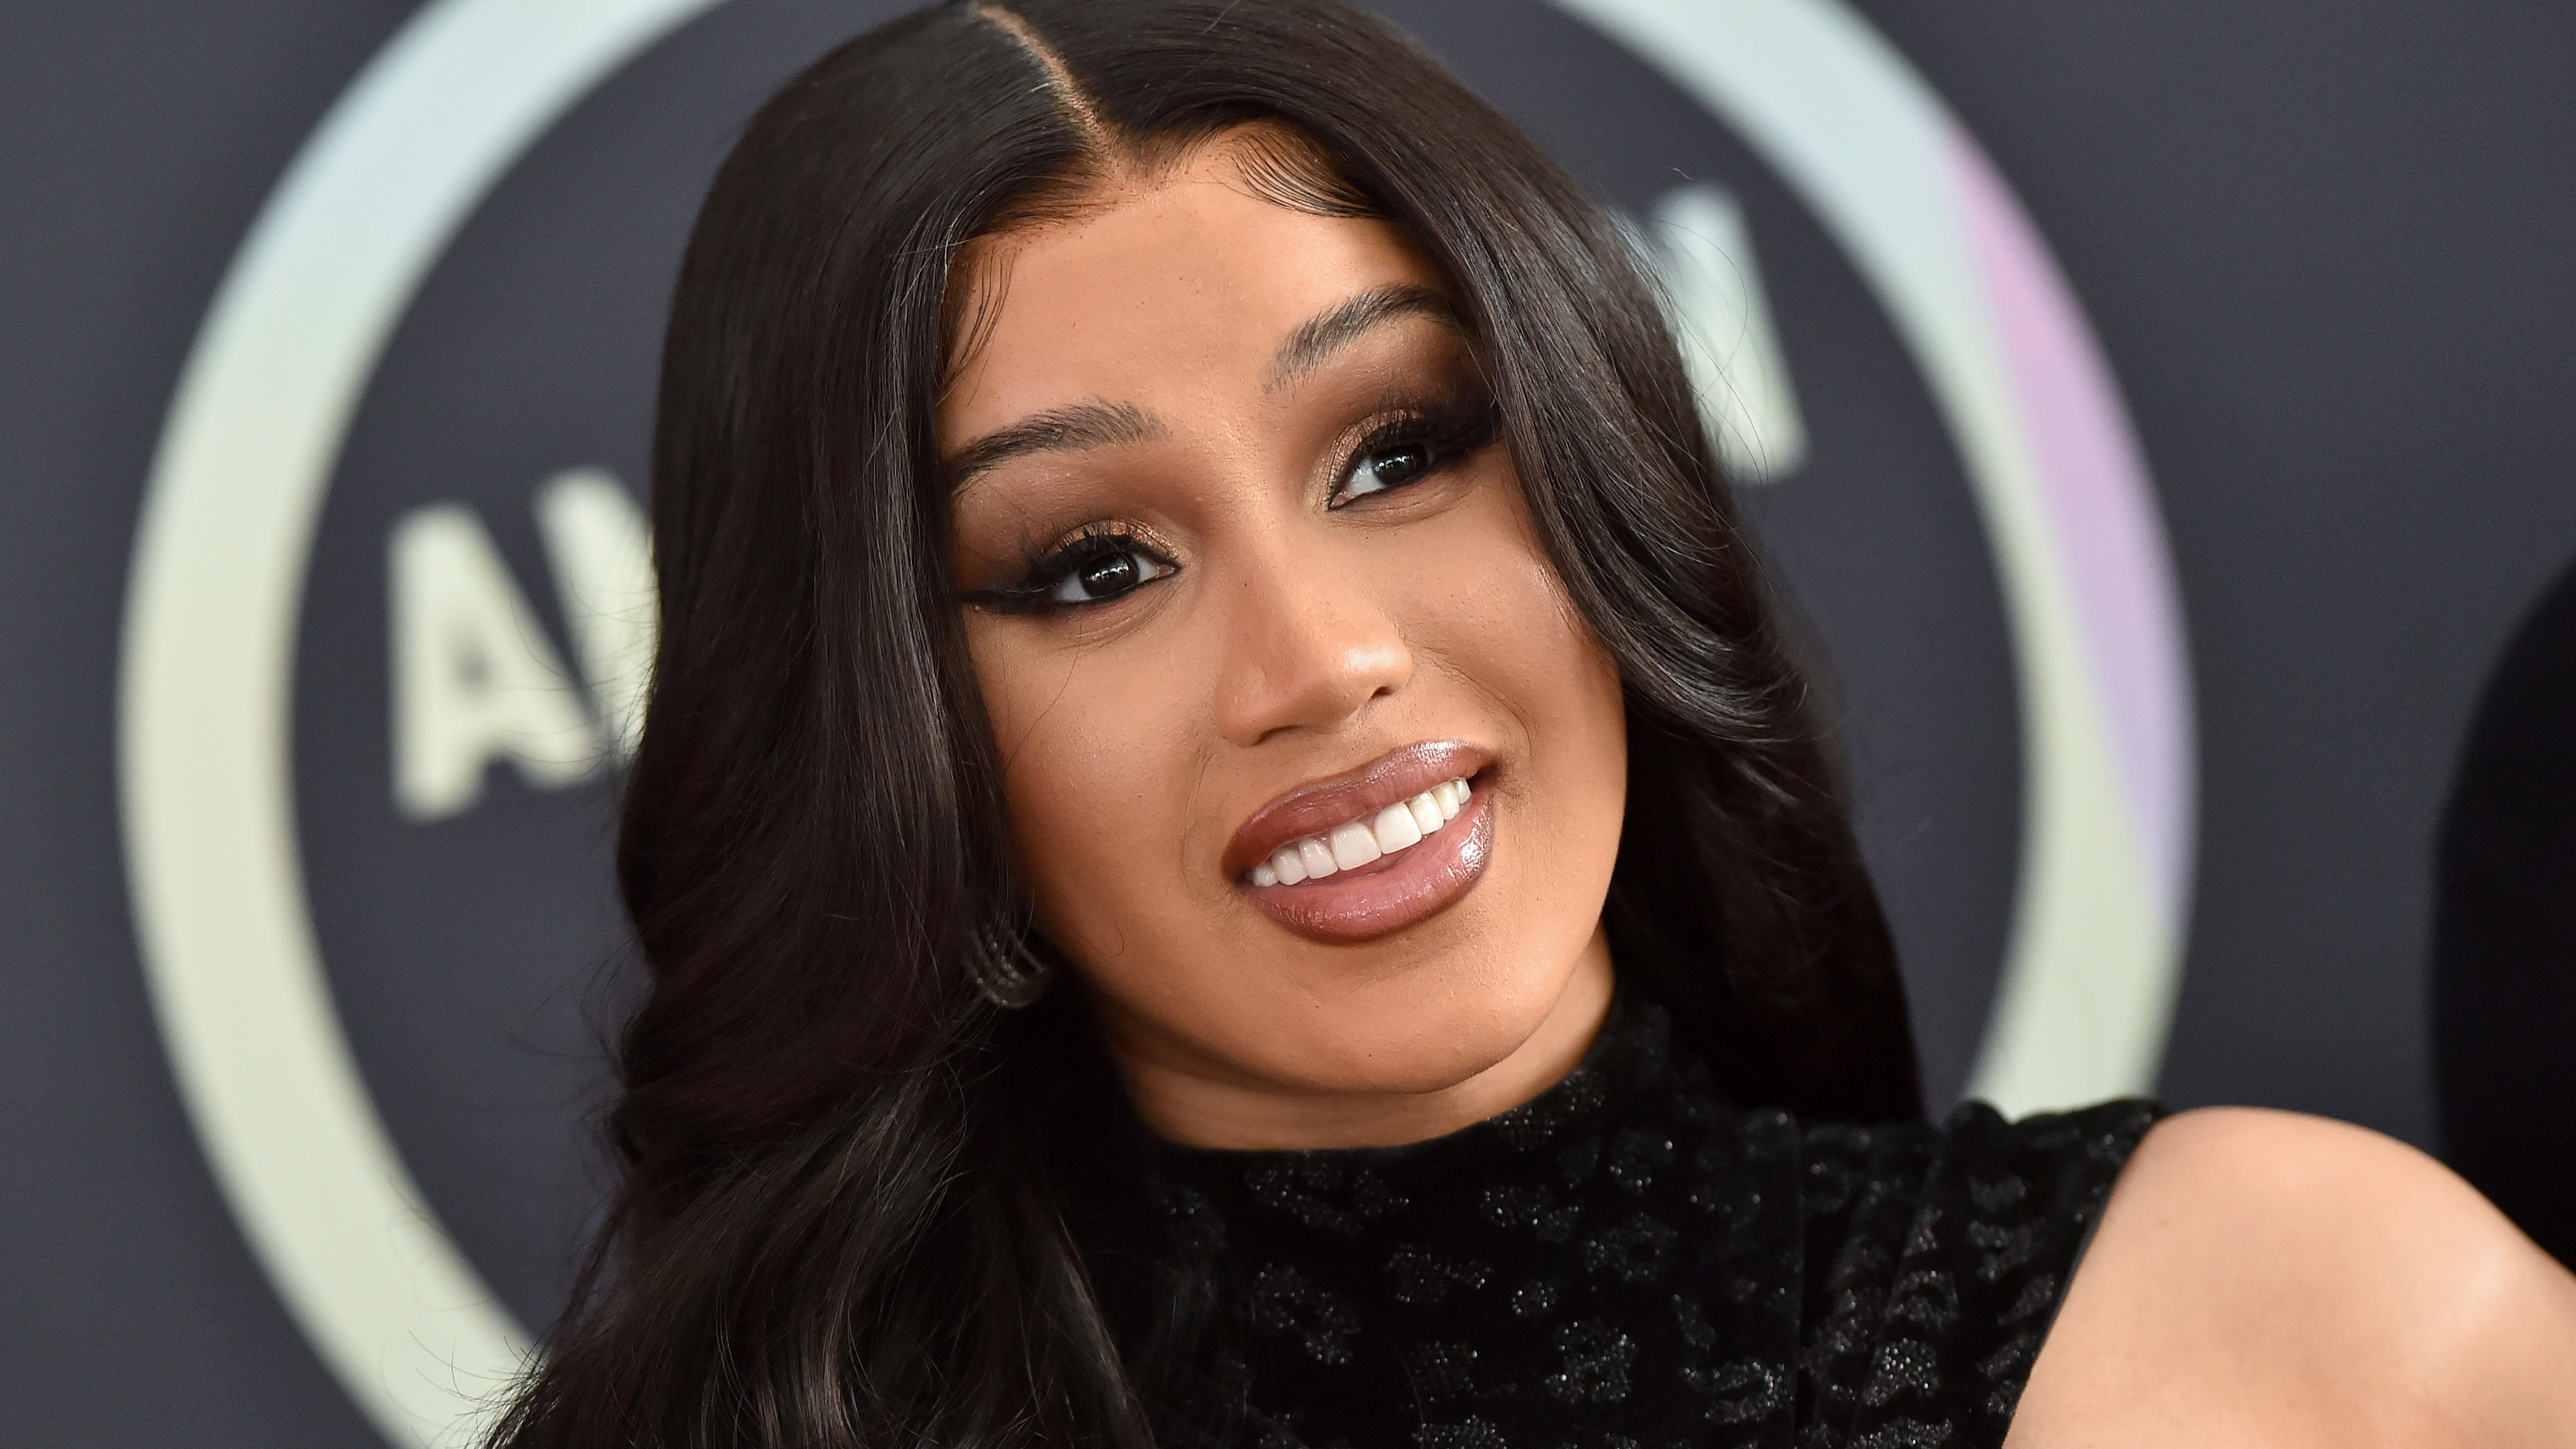 david mailman recommends cardi b butt hole pic